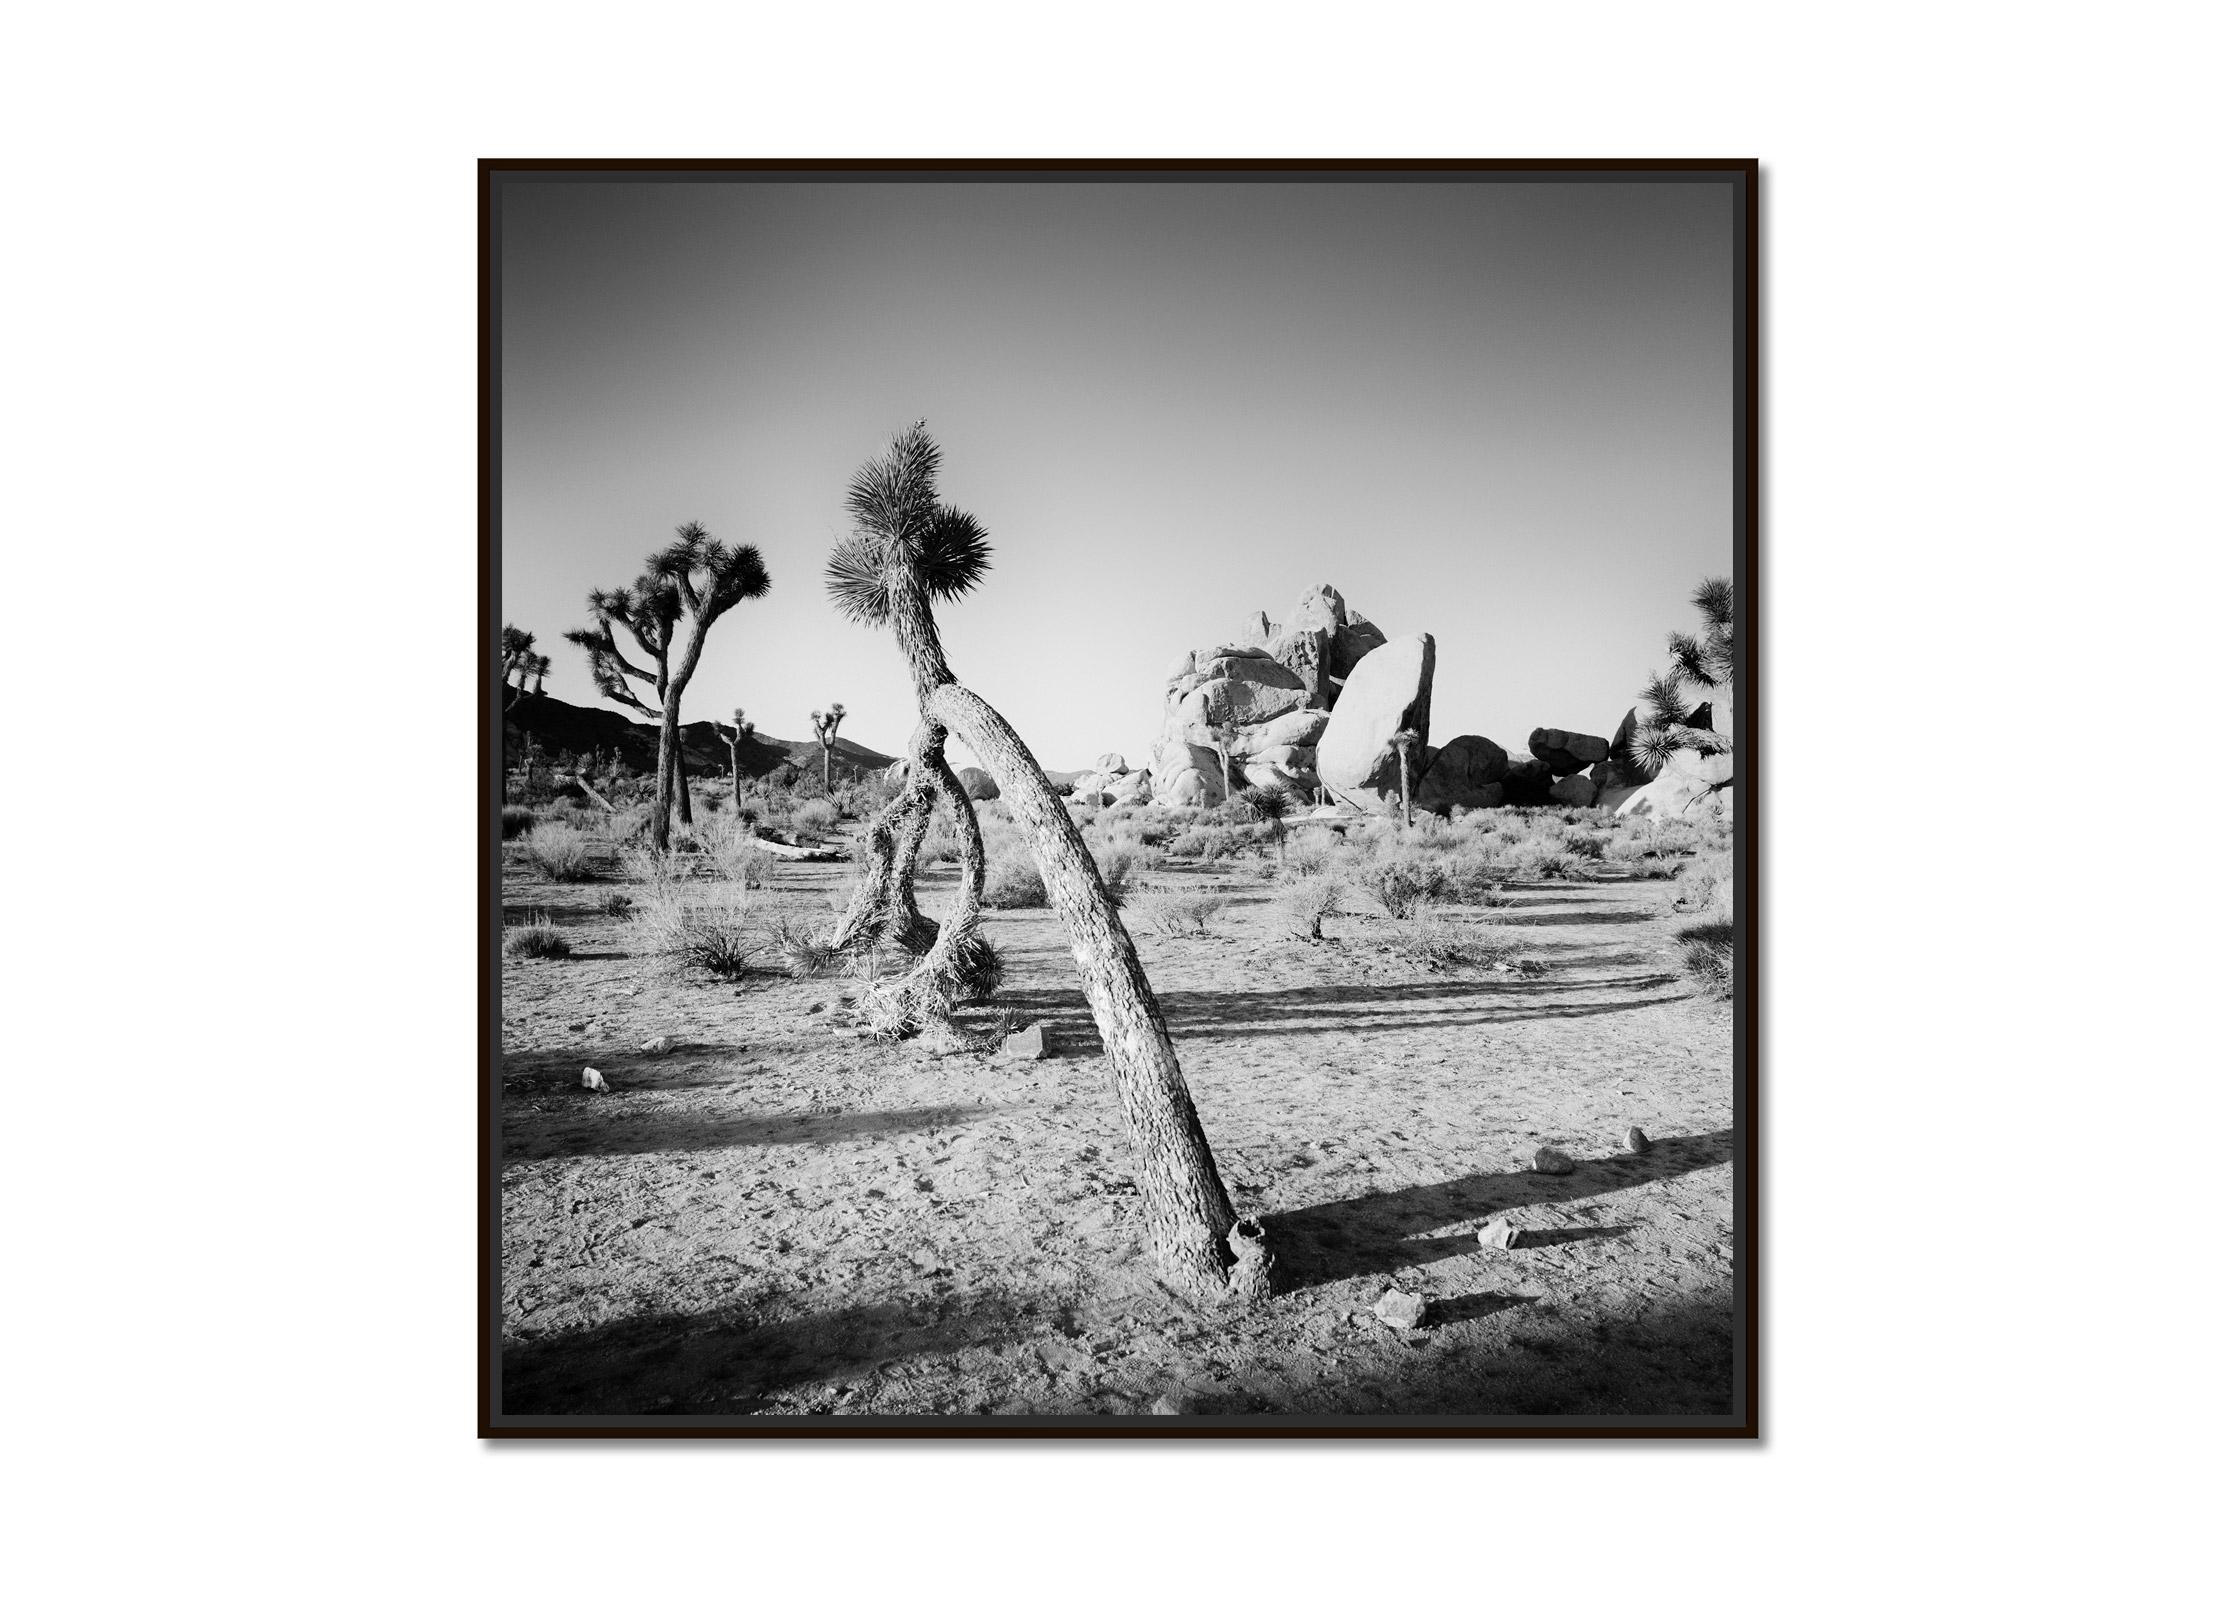 Curved Joshua Tree in Desert, California, black and white photography, landscape - Photograph by Gerald Berghammer